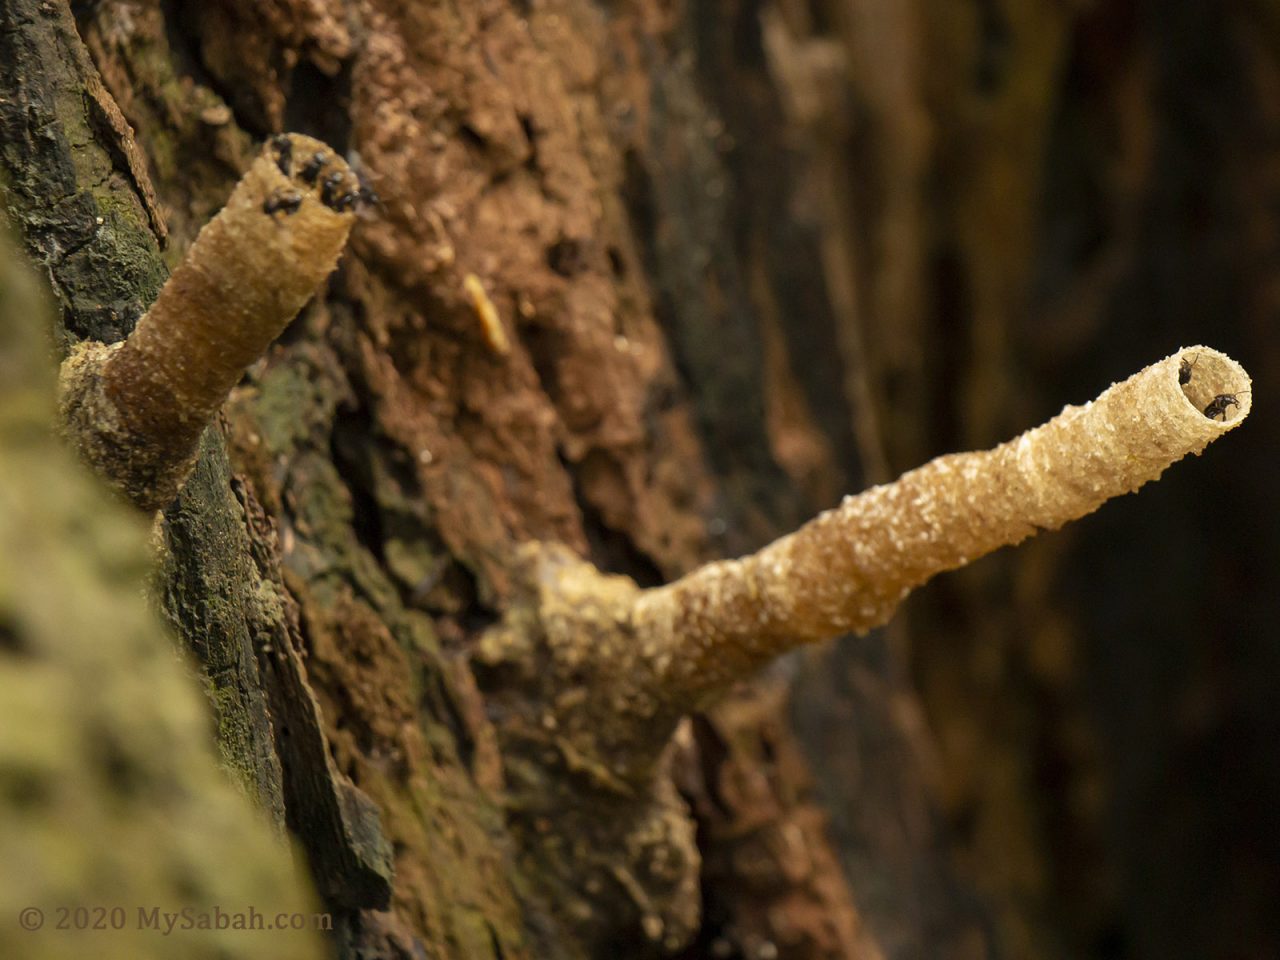 Wax tunnels of wild stingless bees on a tree